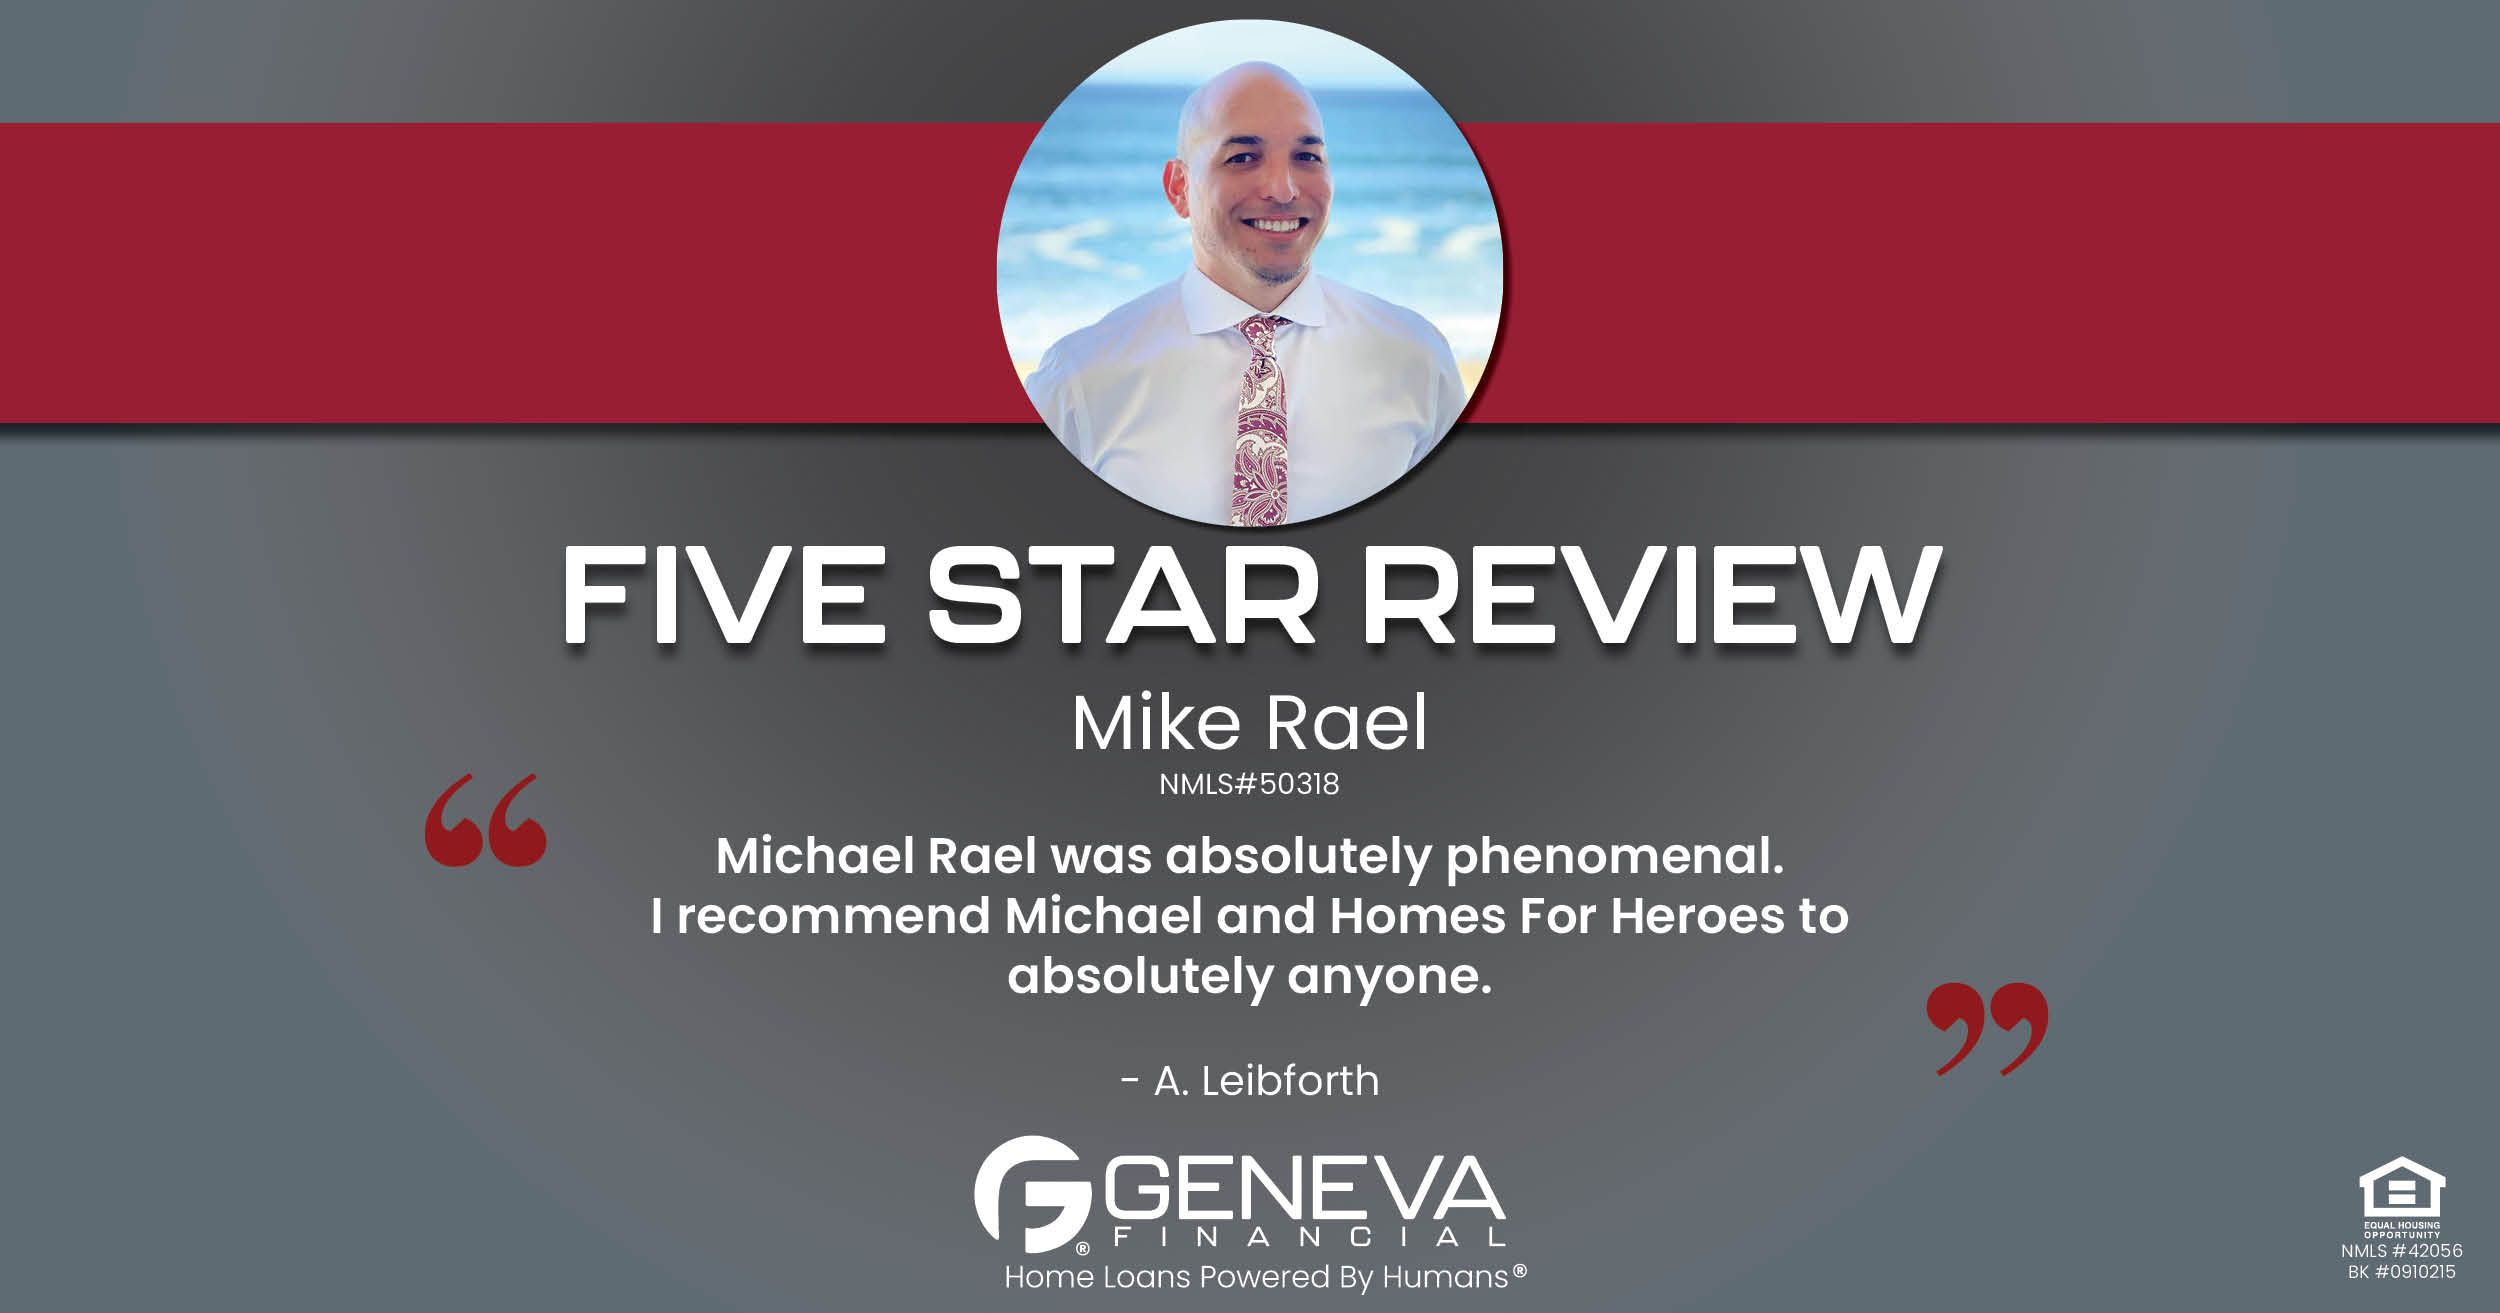 5 Star Review for Licensed Mortgage Loan Officer Mike Rael with Geneva Financial, Temecula, CA – Home Loans Powered by Humans®.